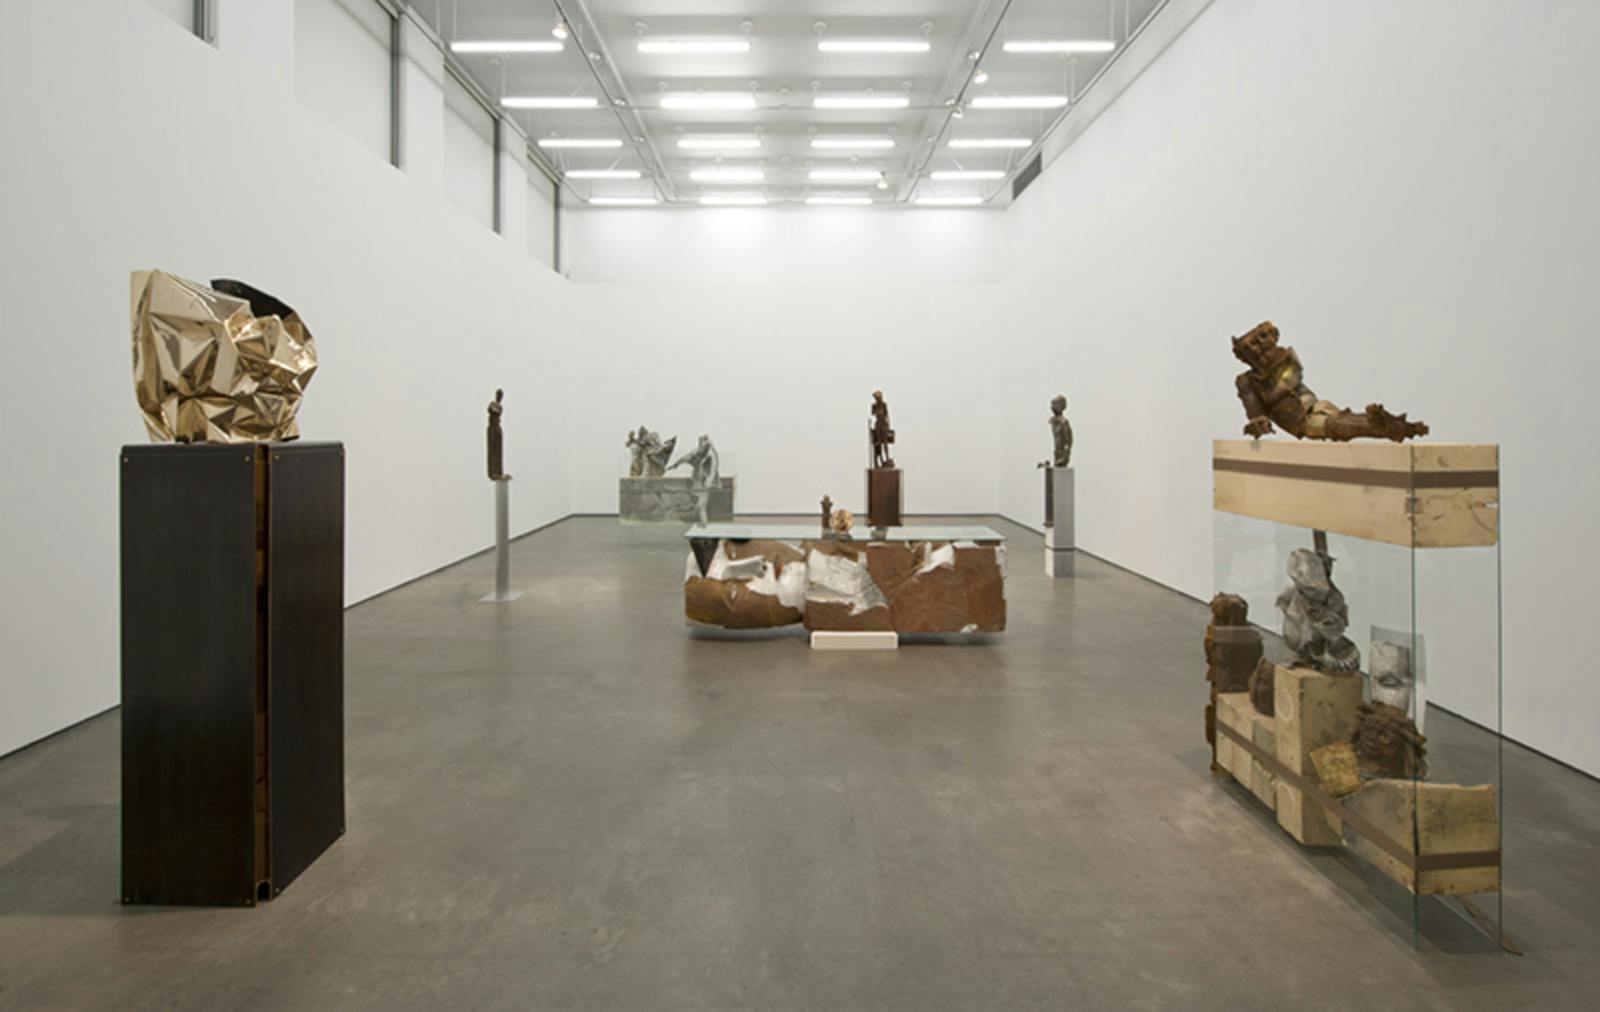 Multiple sculptures on plinths of different heights and materials and design are installed in a gallery space. One has an abstract form with a metallic surface while the rest resemble human forms. 